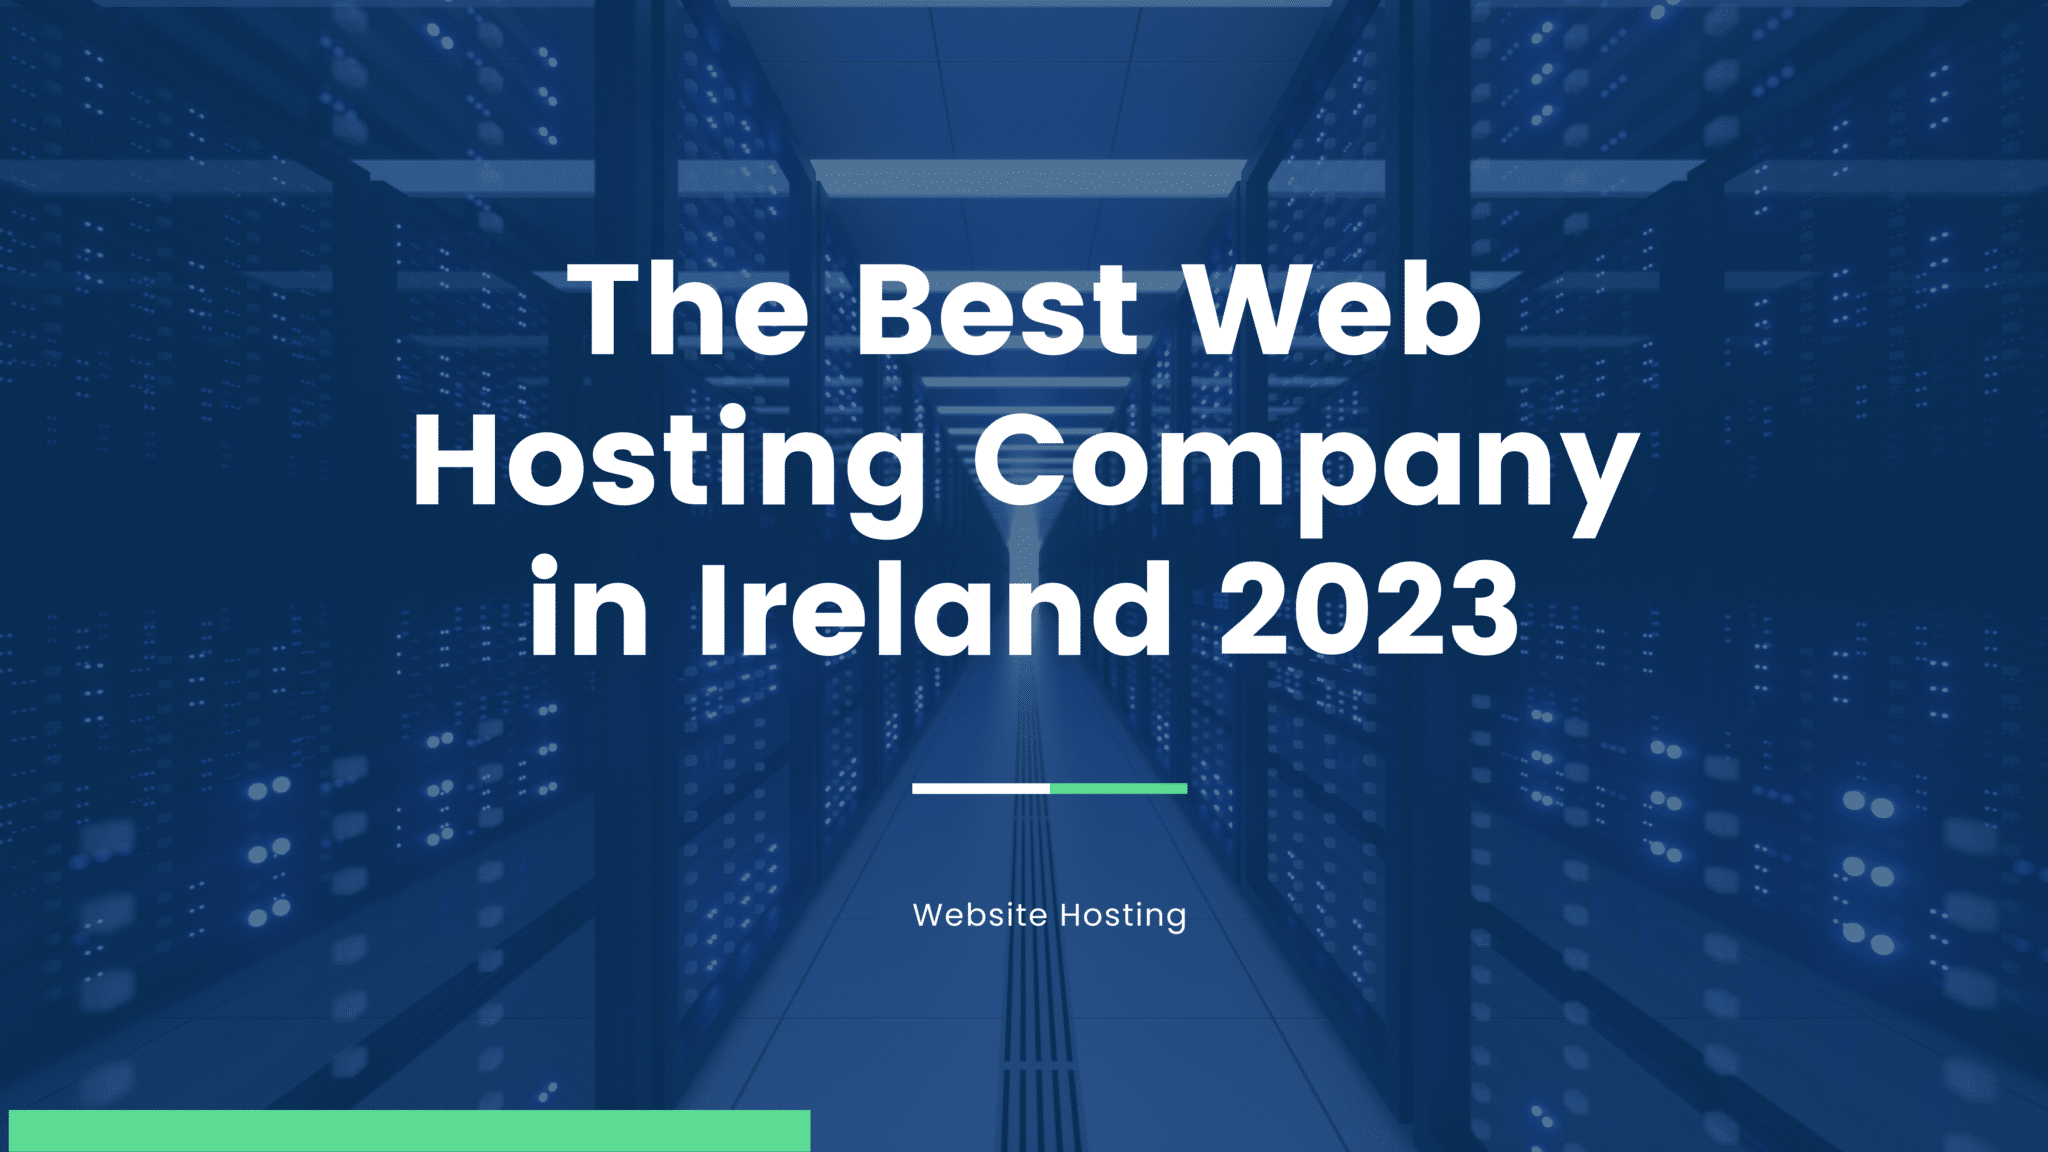 This image is showcasing the best web hosting company in Ireland for the year 2023.